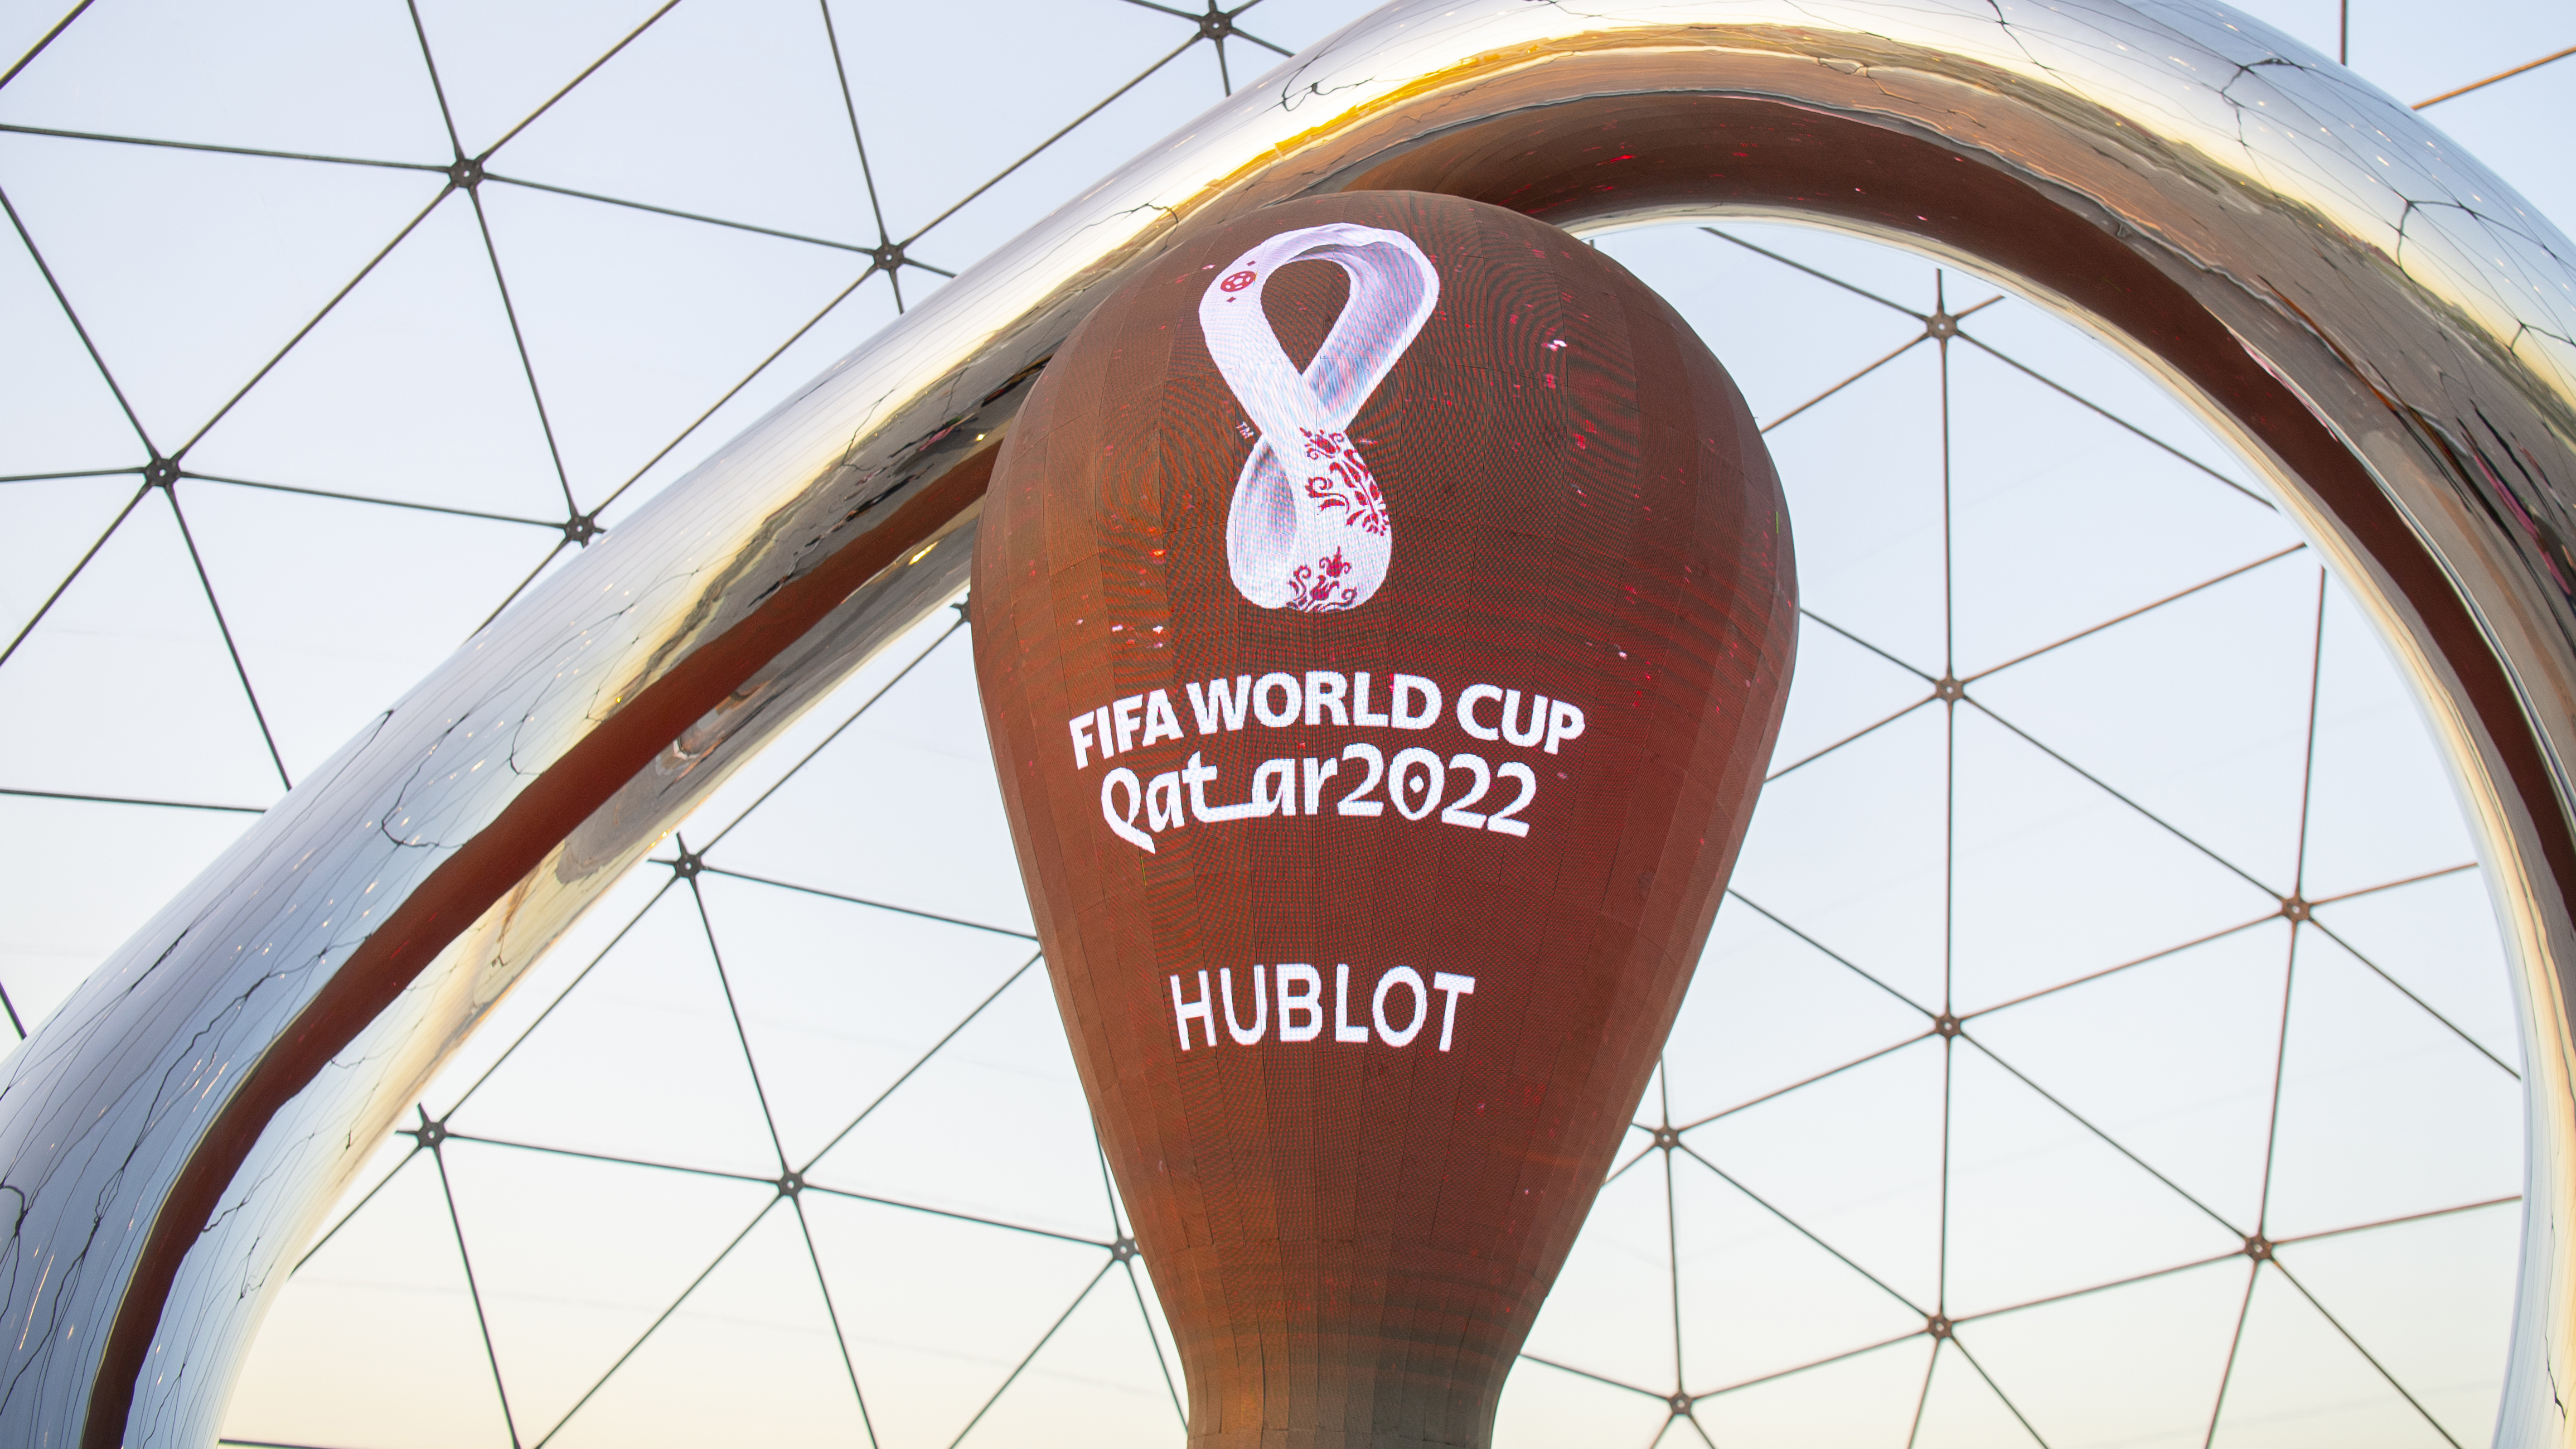 Everything you need to know about the 2022 FIFA World Cup Qatar